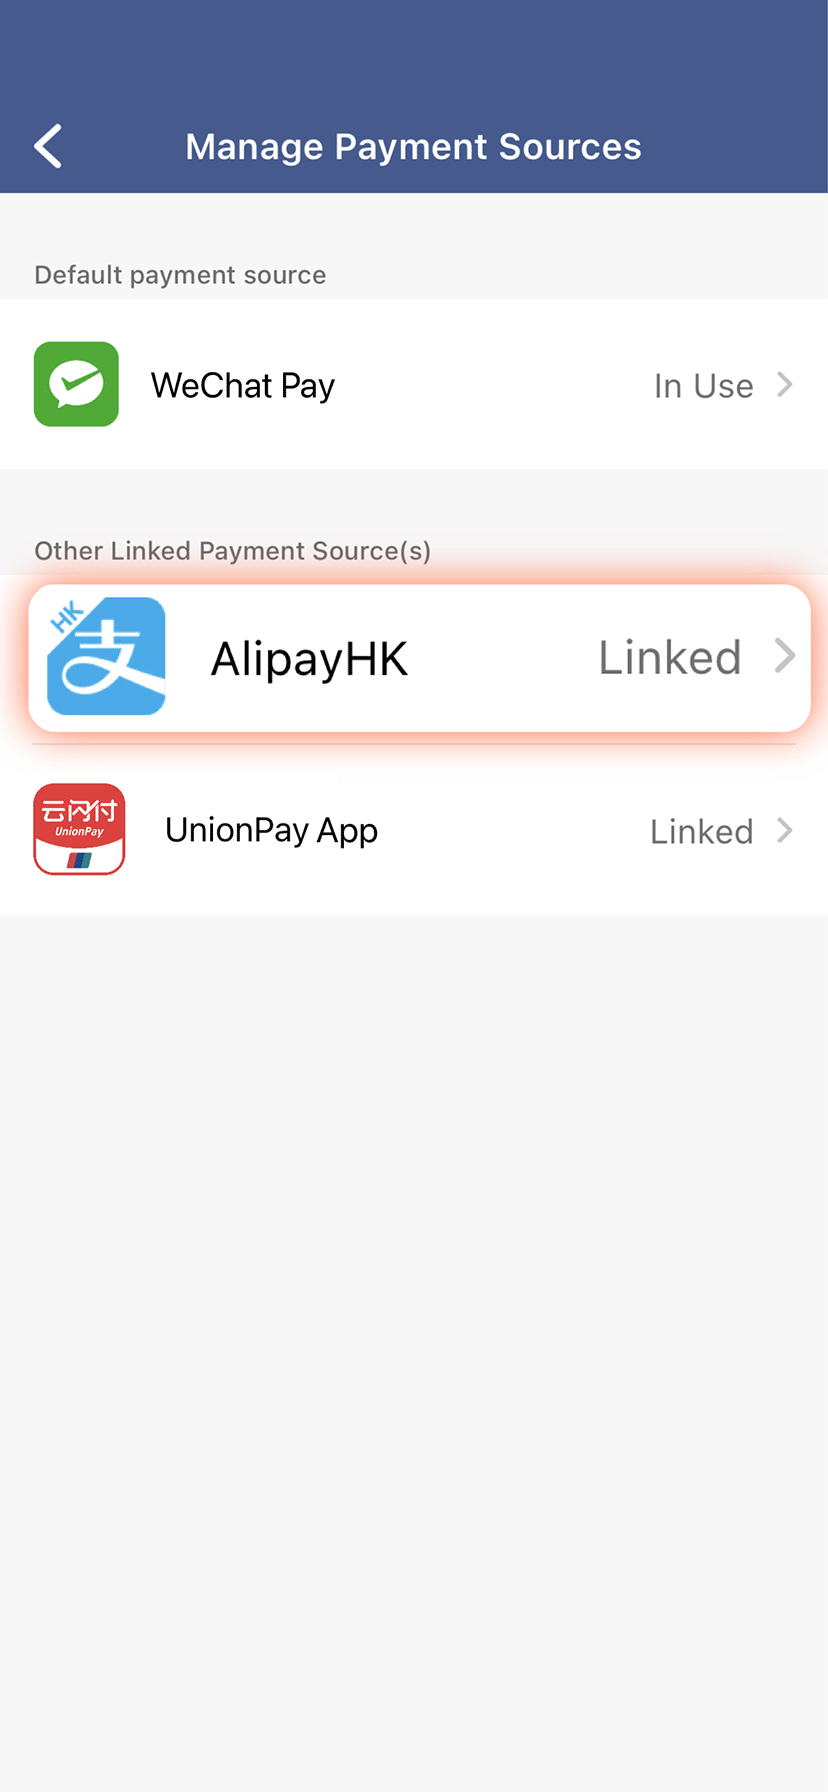 Select your default payment source, then tap 'Set as default payment source' and tap 'Confirm'